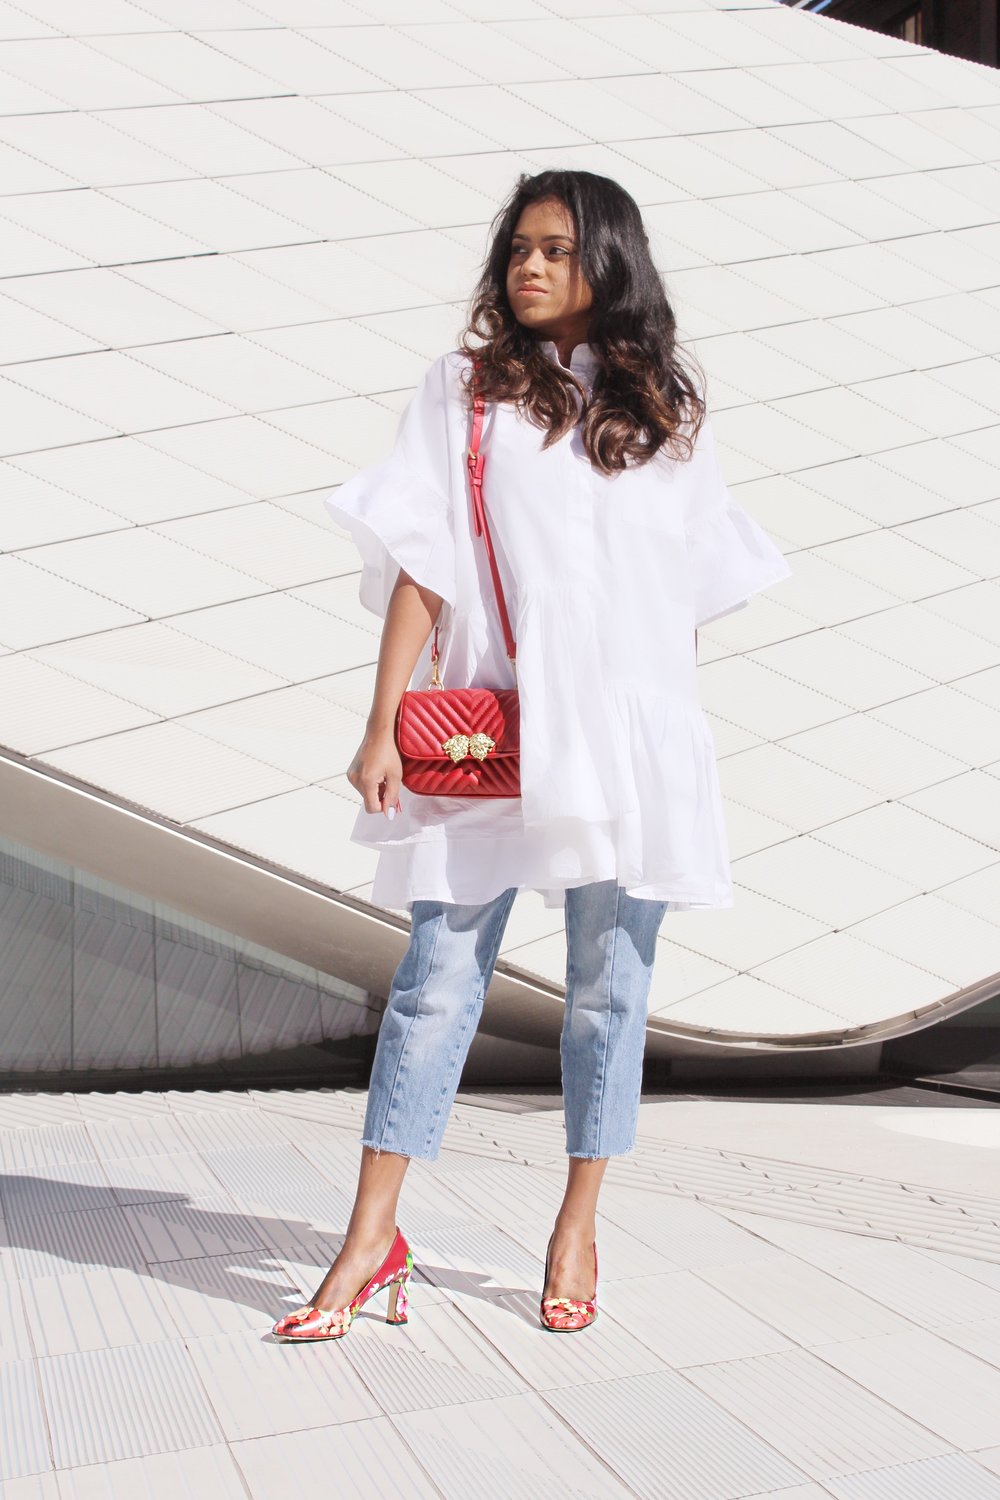 Sachini wearing a white dress, red Gucci shoes and Levi's jeans